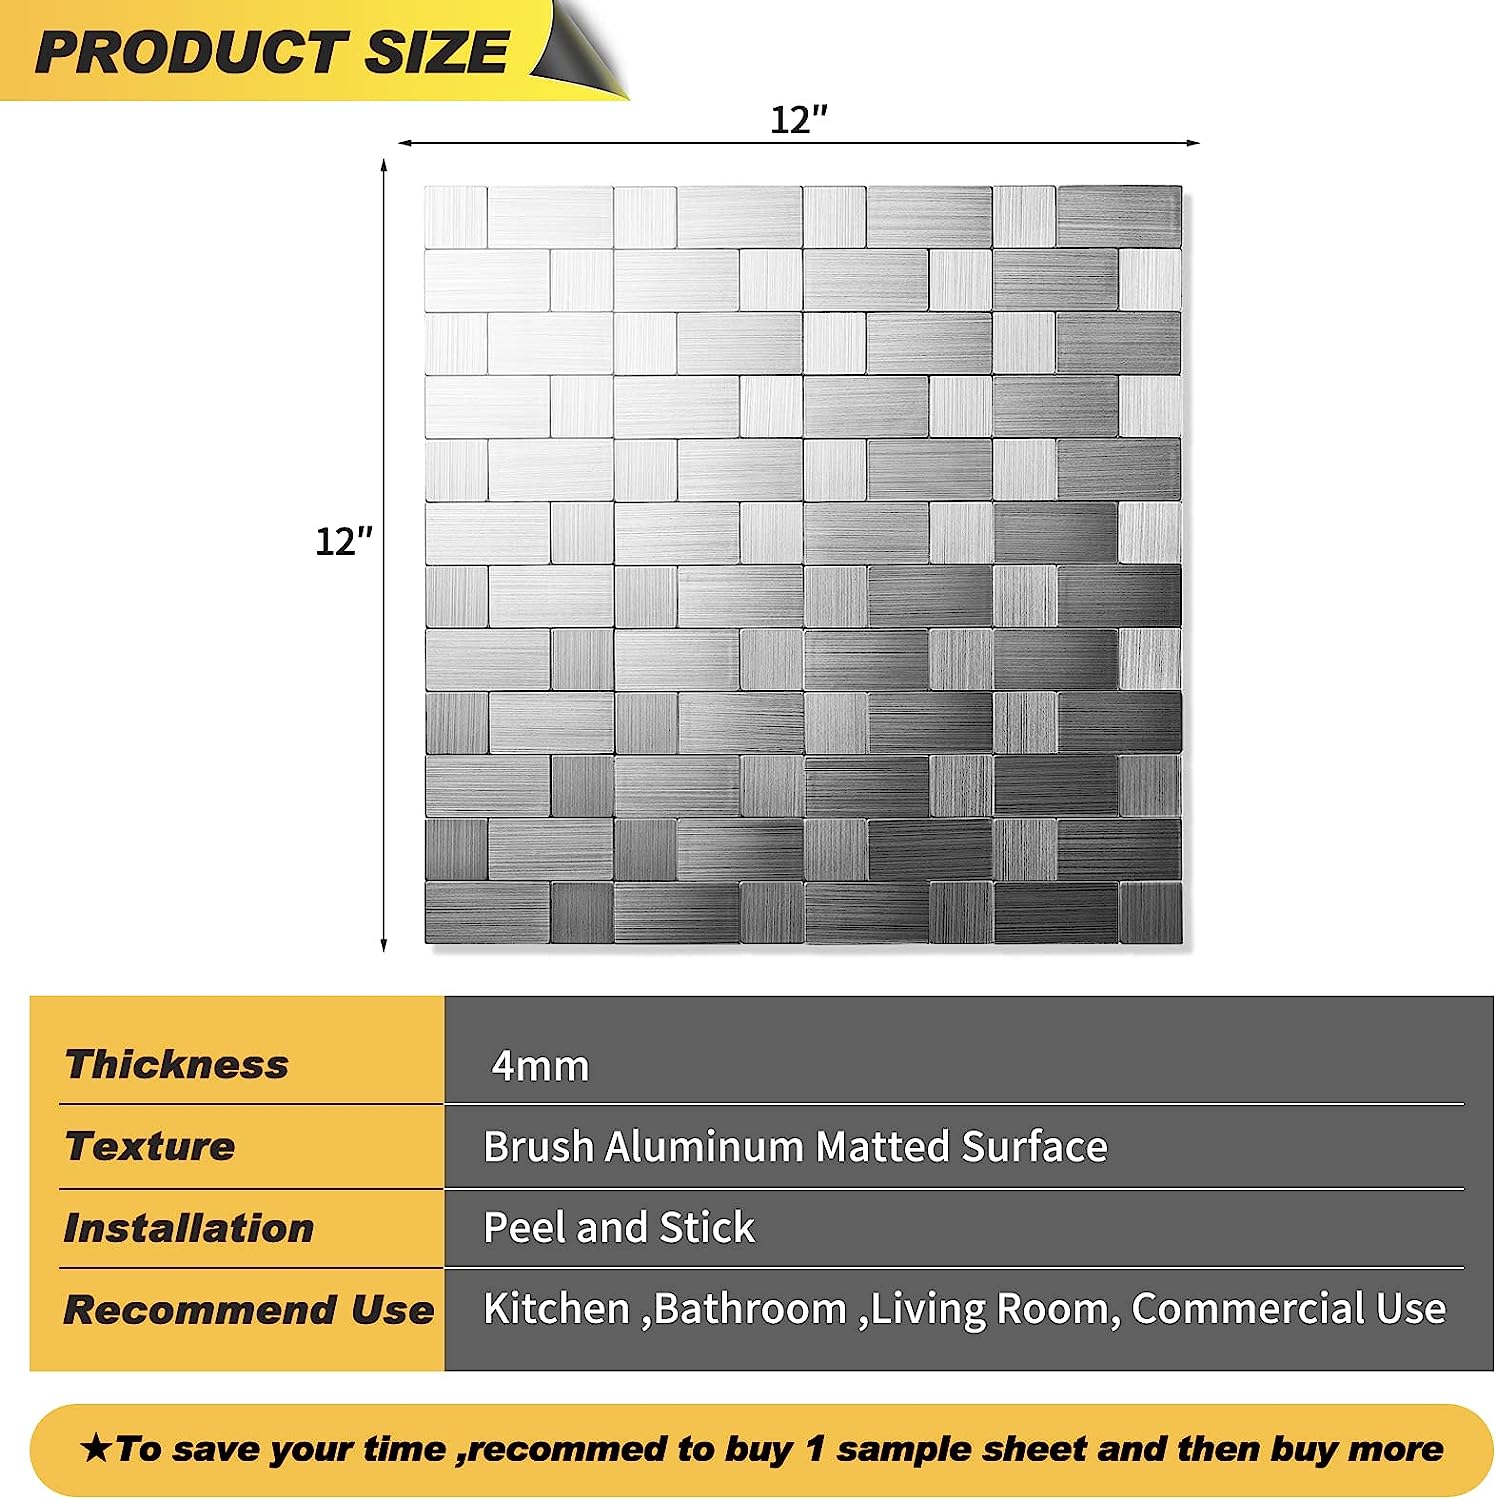 stainless steal backsplash for kitchen in Square + Rectangle life style image